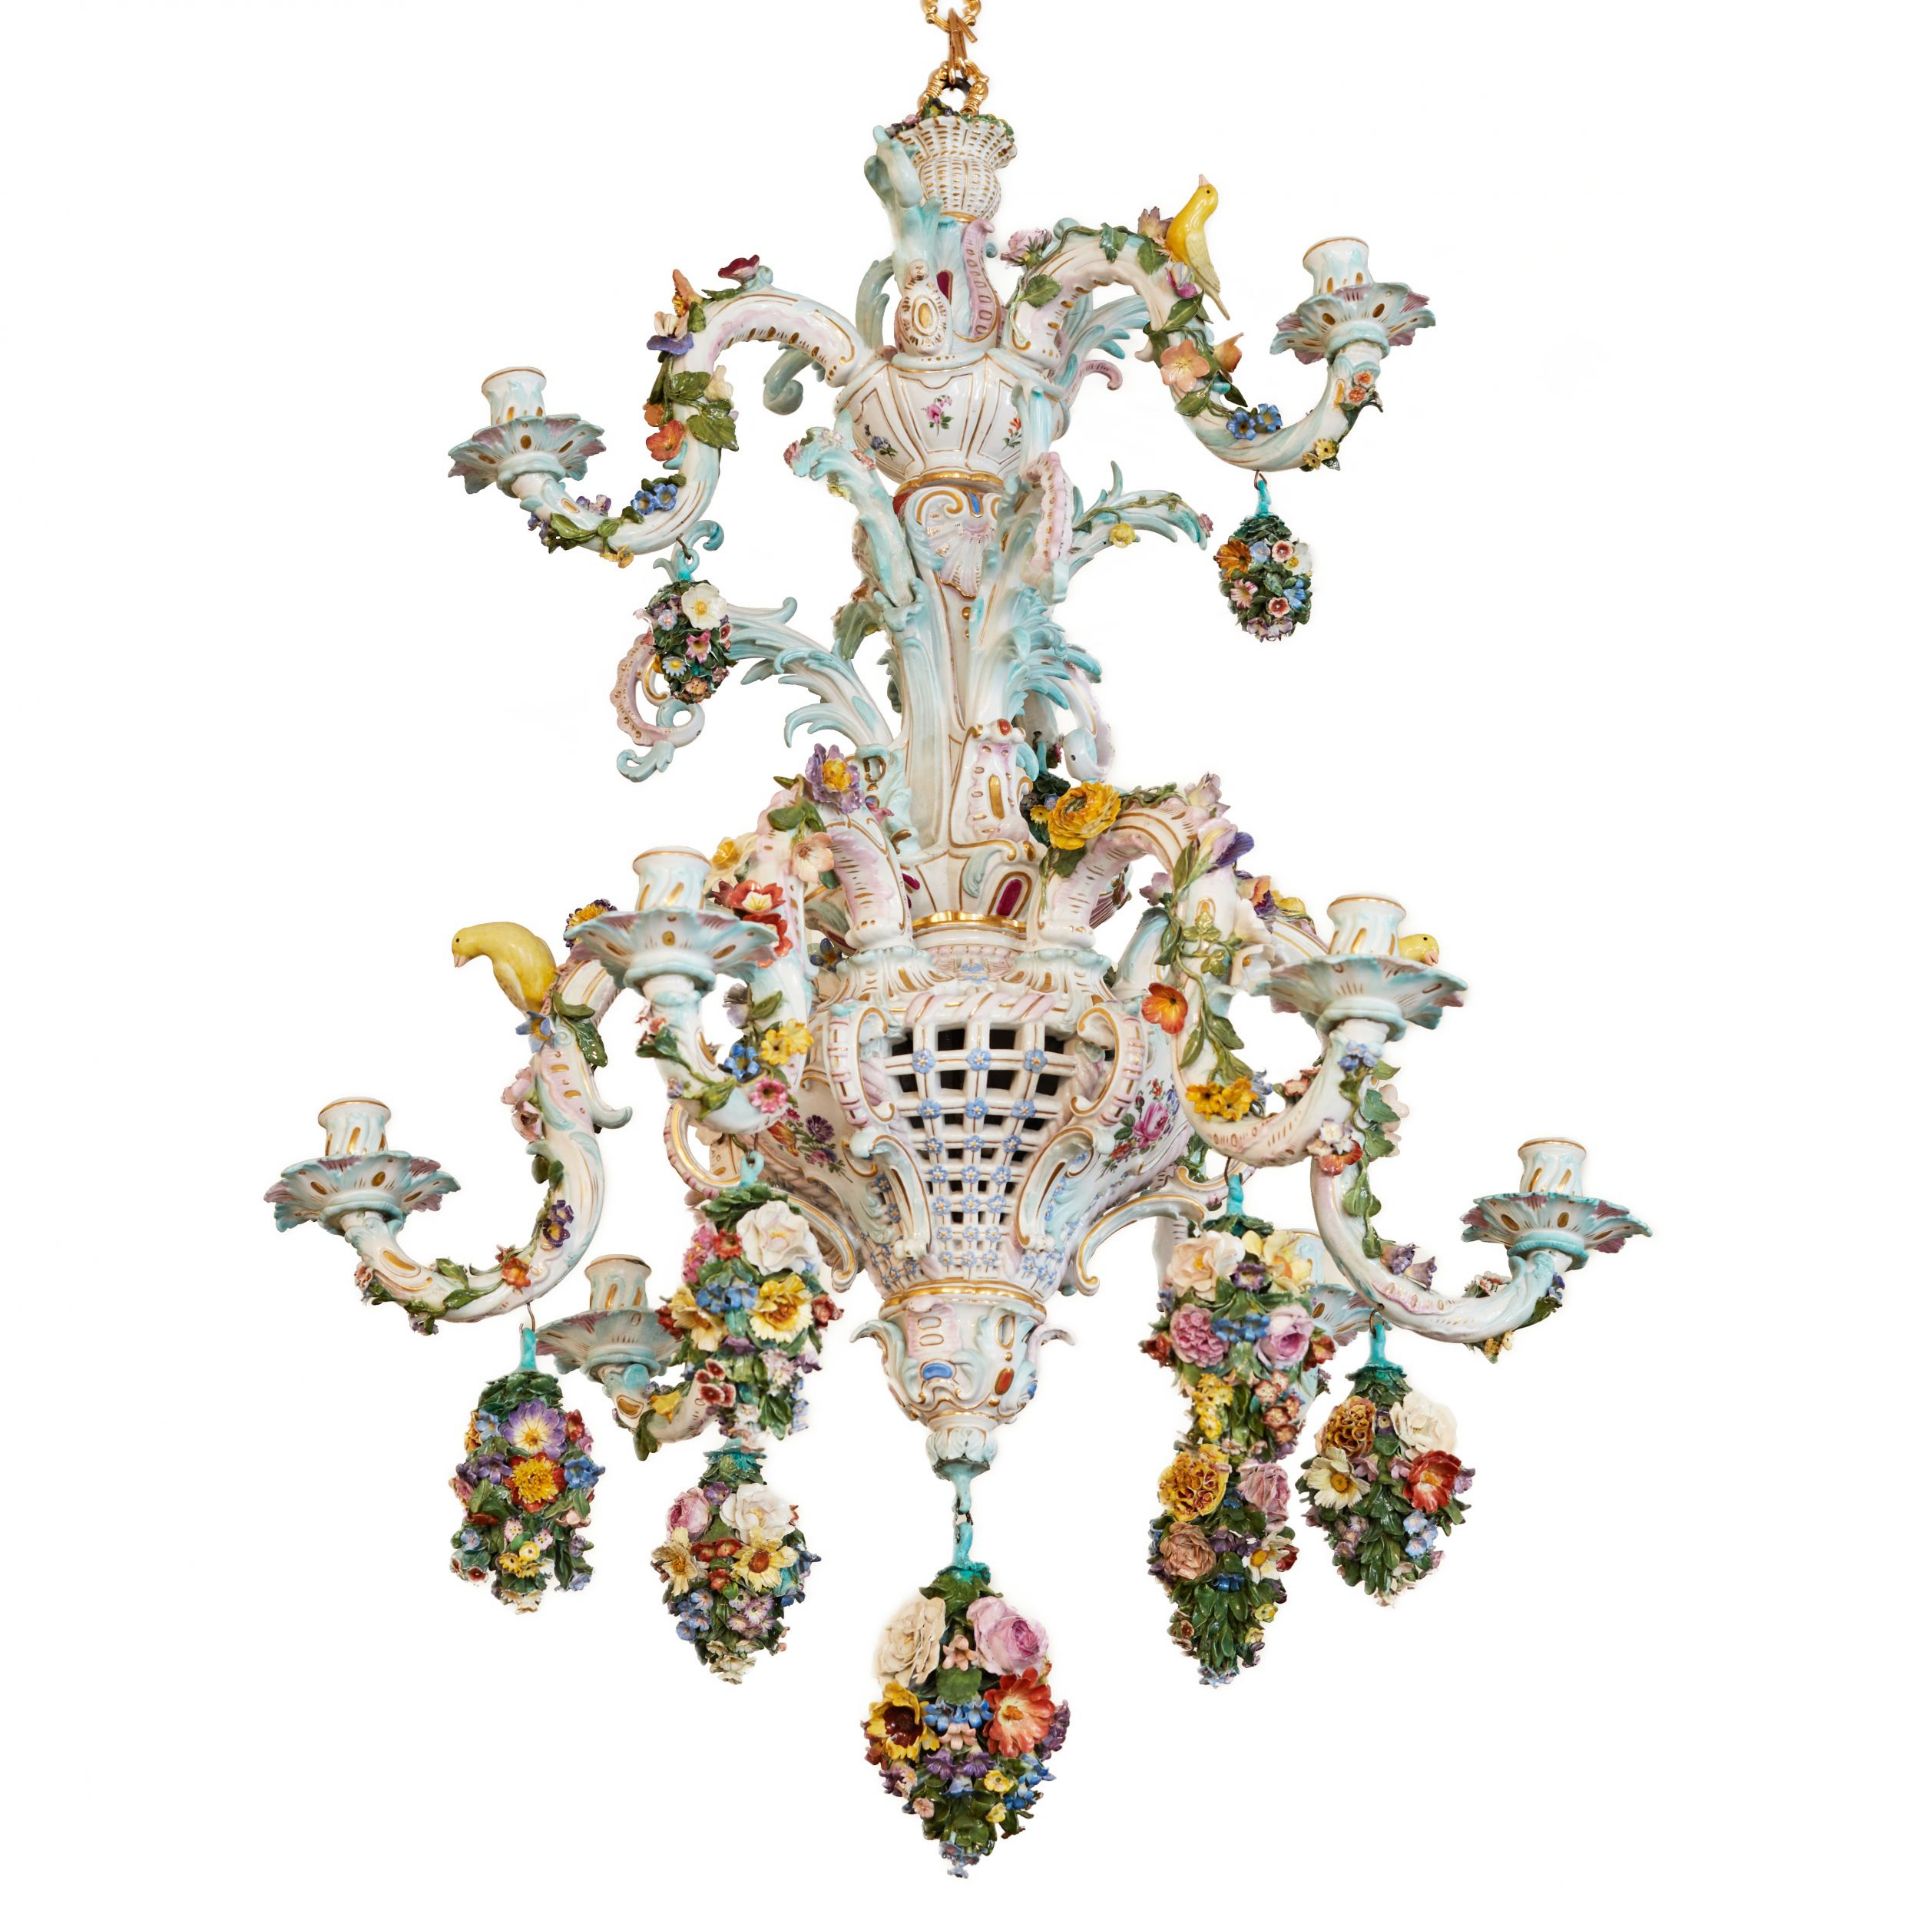 Delightful porcelain chandelier Meissen 1790, from the residence of King Alfonso XIII in Biarritz. - Image 2 of 8